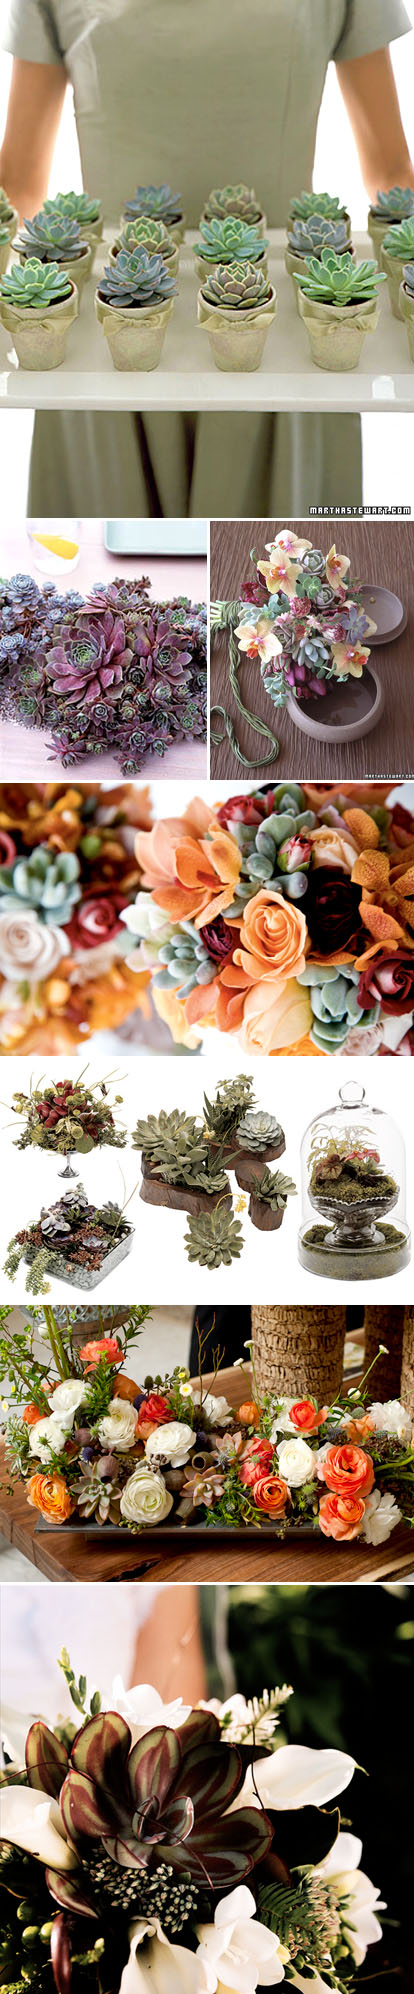 spring wedding bouquets, centerpieces, boutonnieres and floral decor with succulents